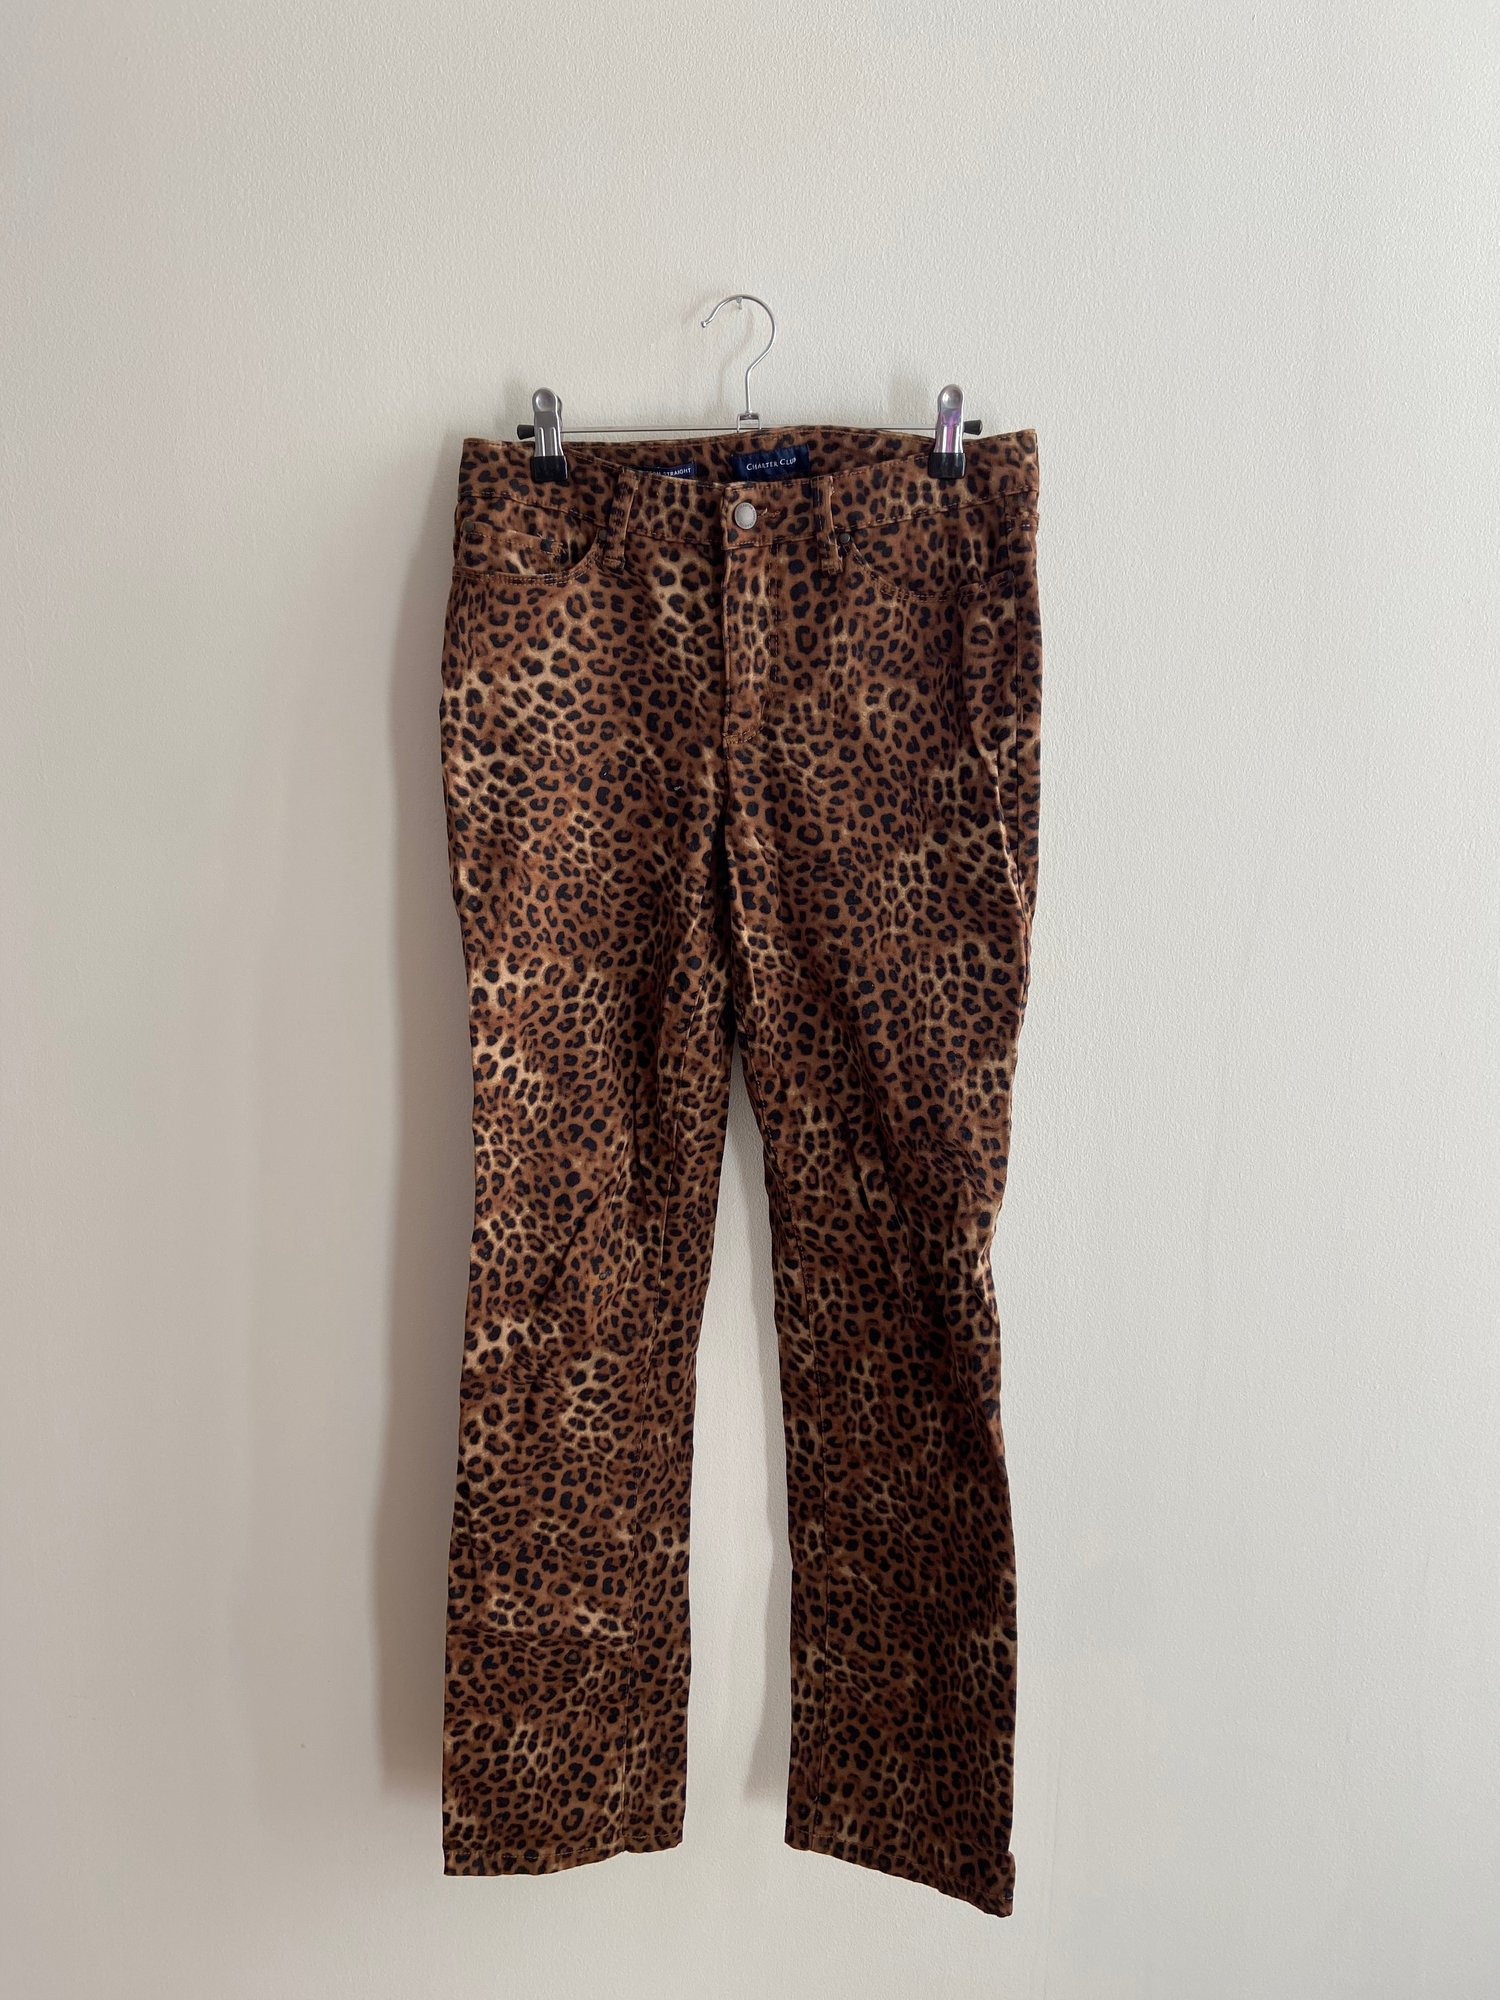 everyone needs some cheetah print pants in their lives 